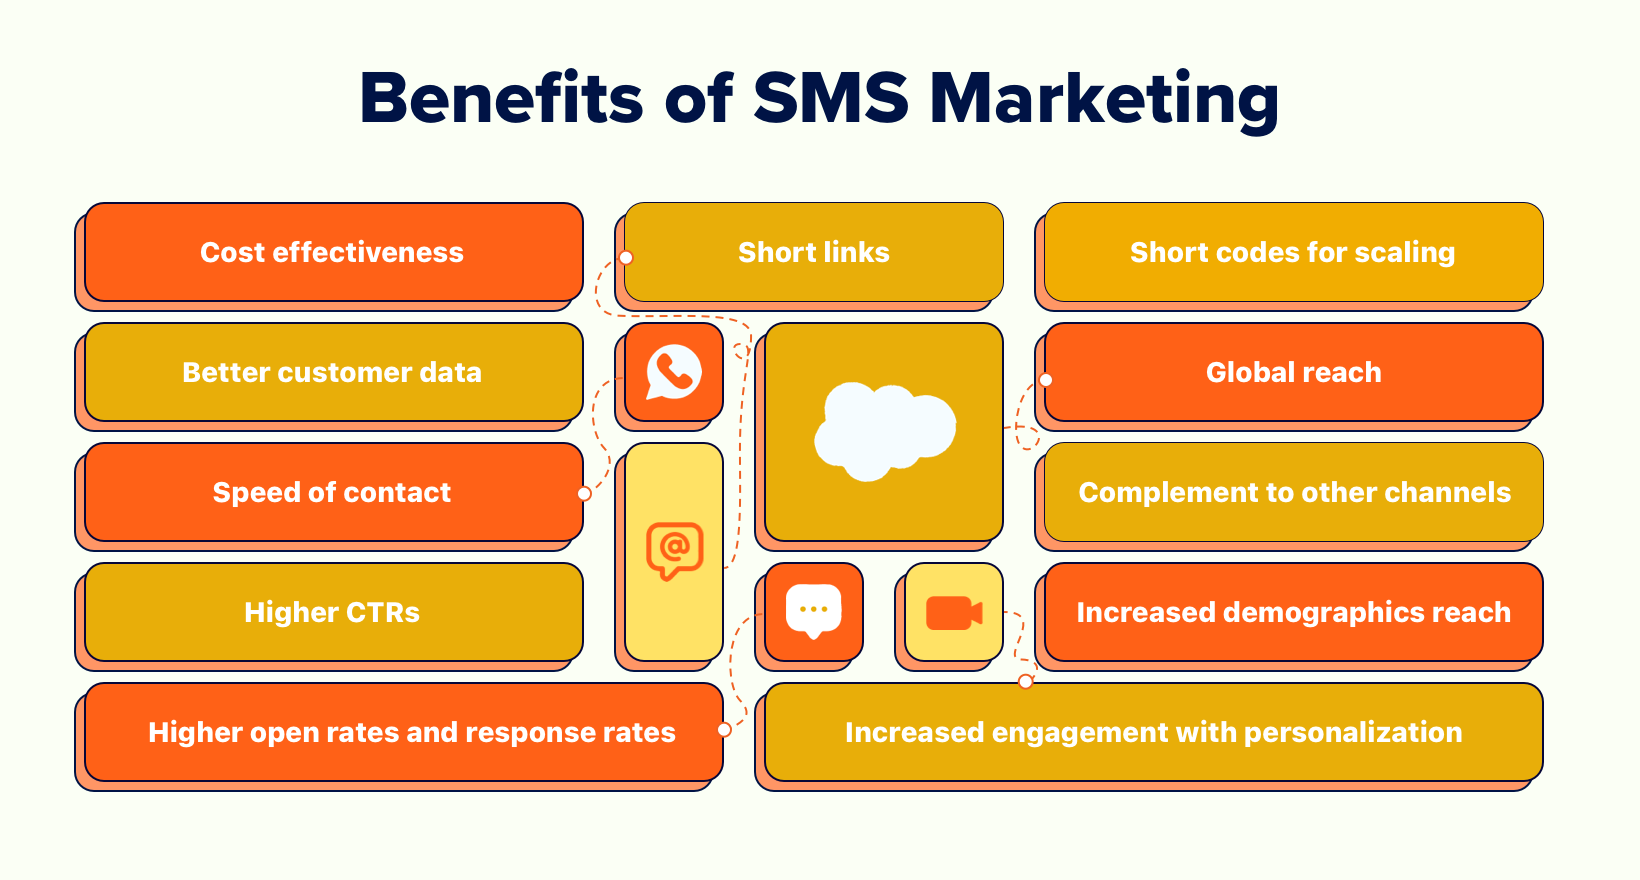 A visual representation of the benefits of SMS marketing.